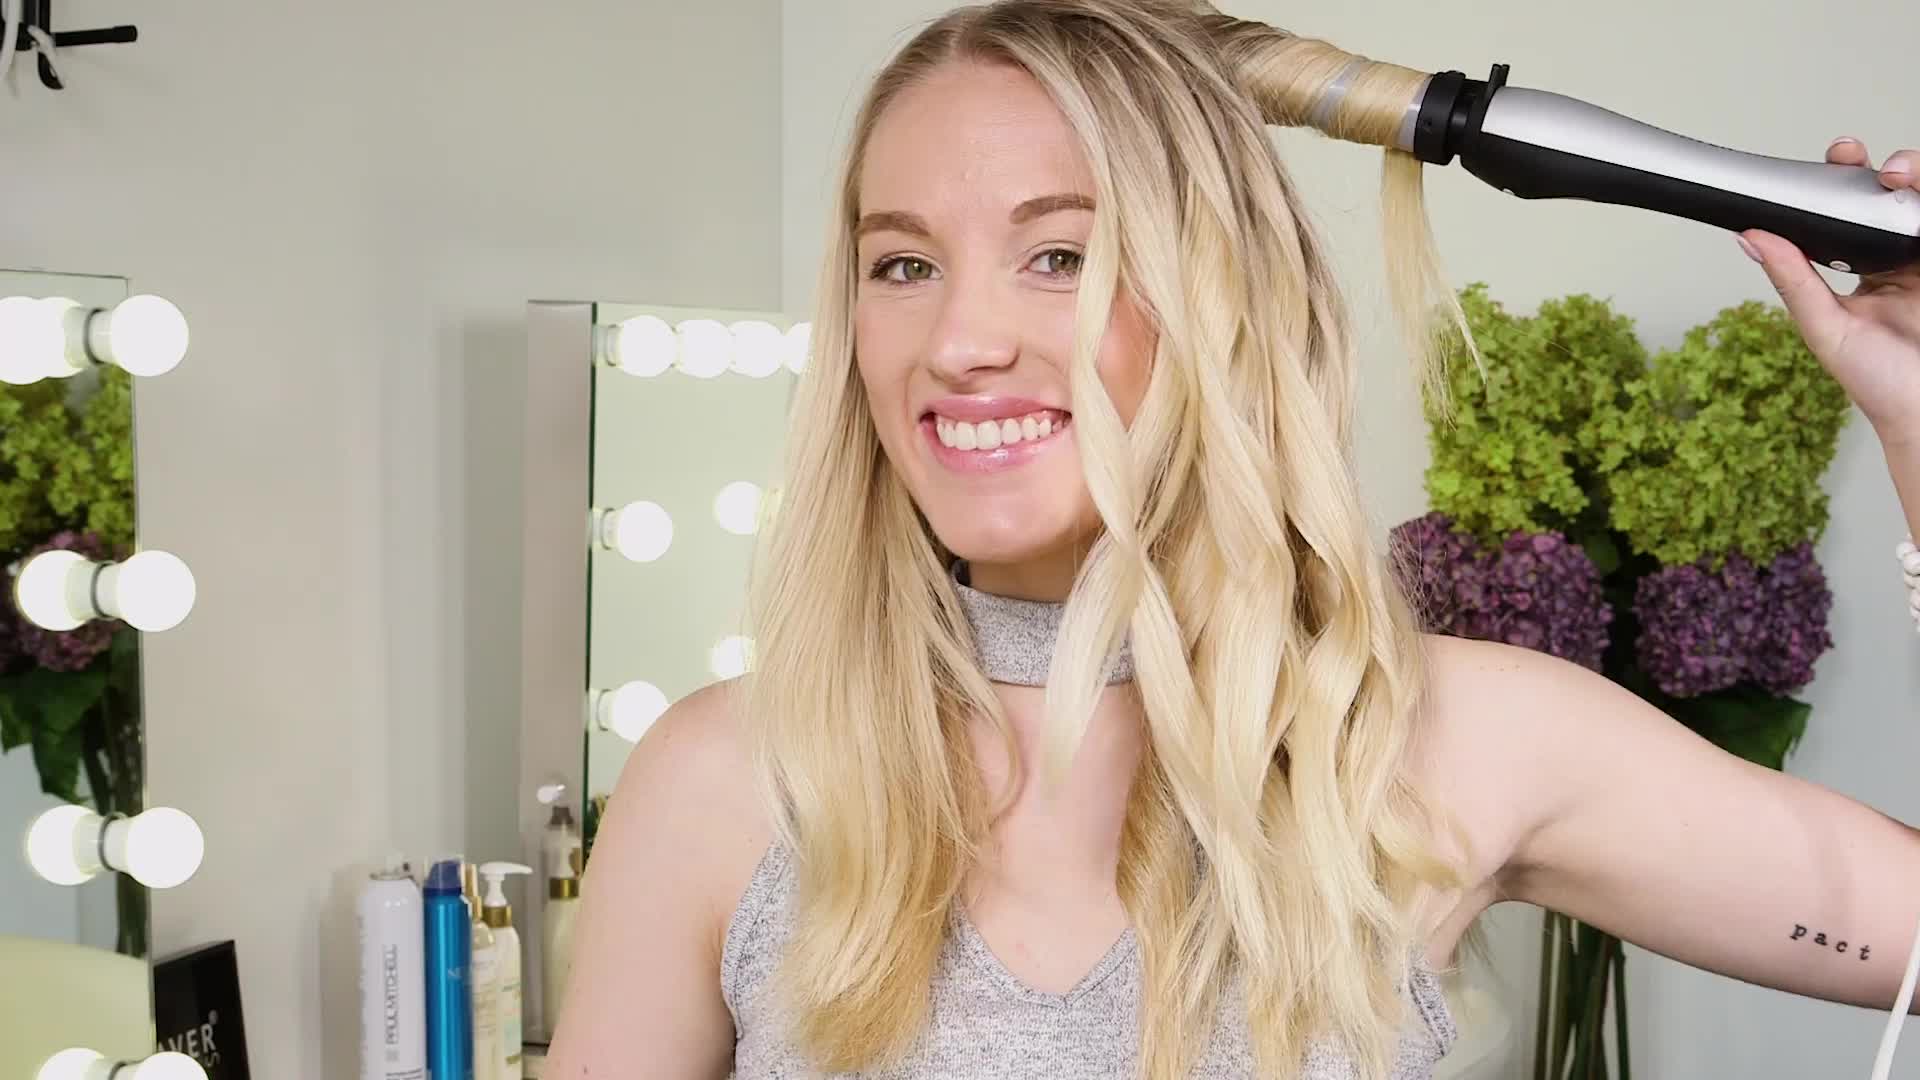 Watch How To Use The Beachwaver | Allure Video | CNE | Allure.com | Allure